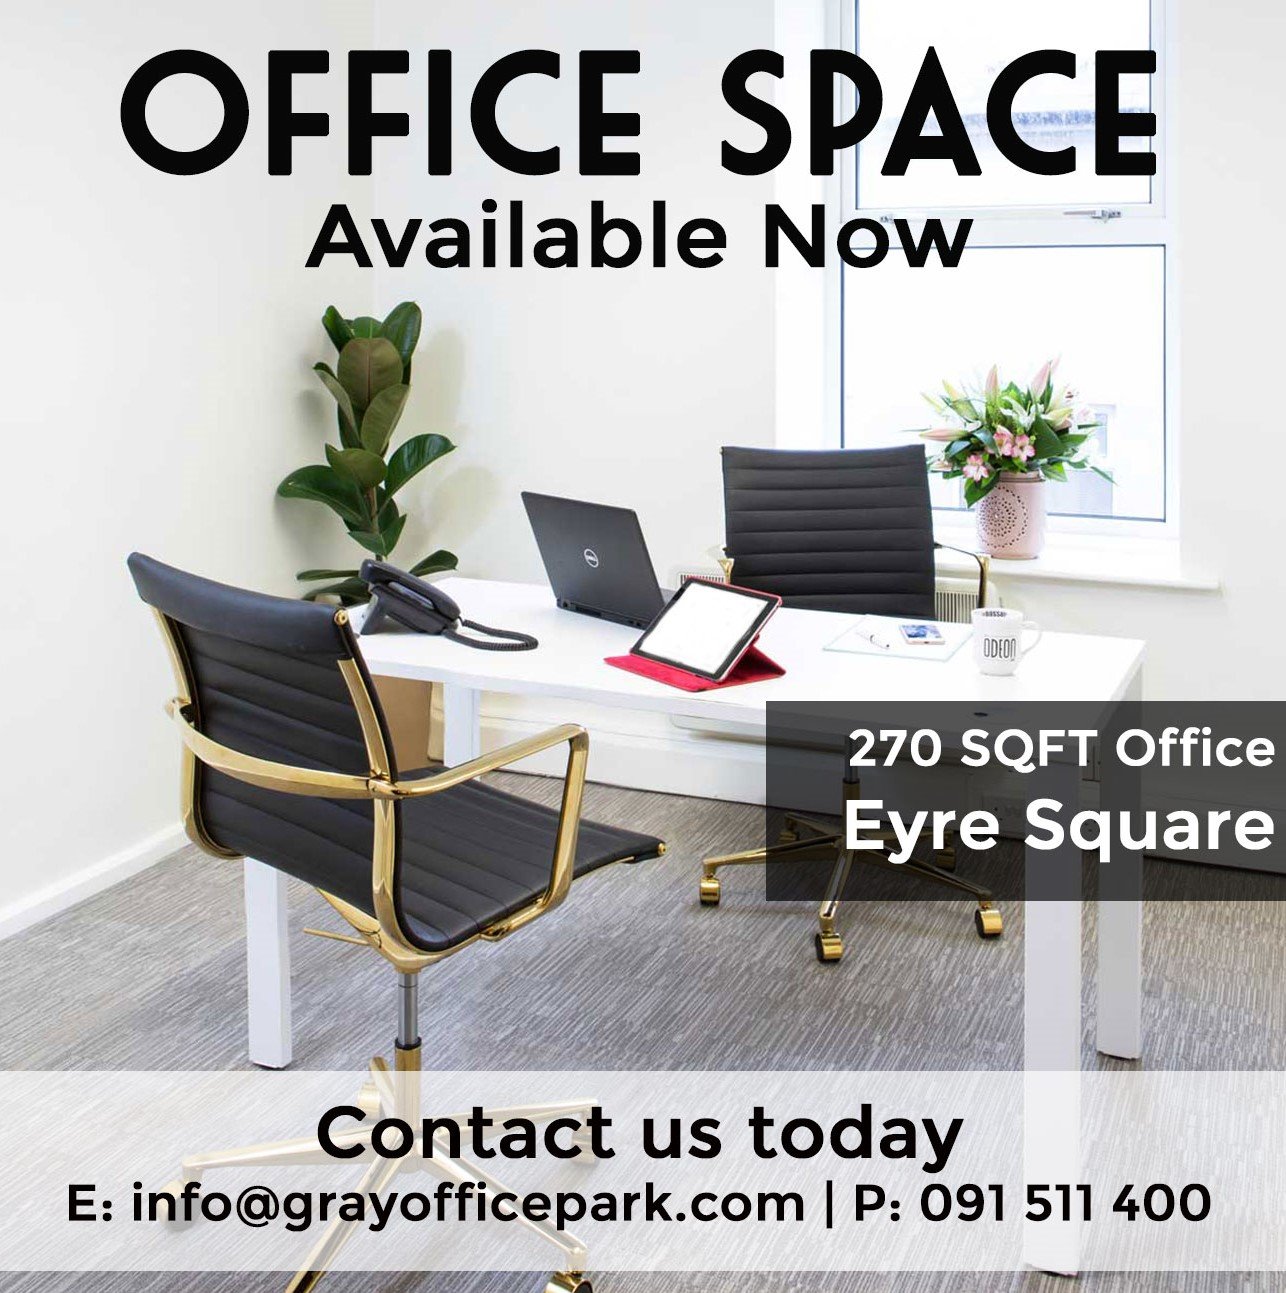 Eyre square office space